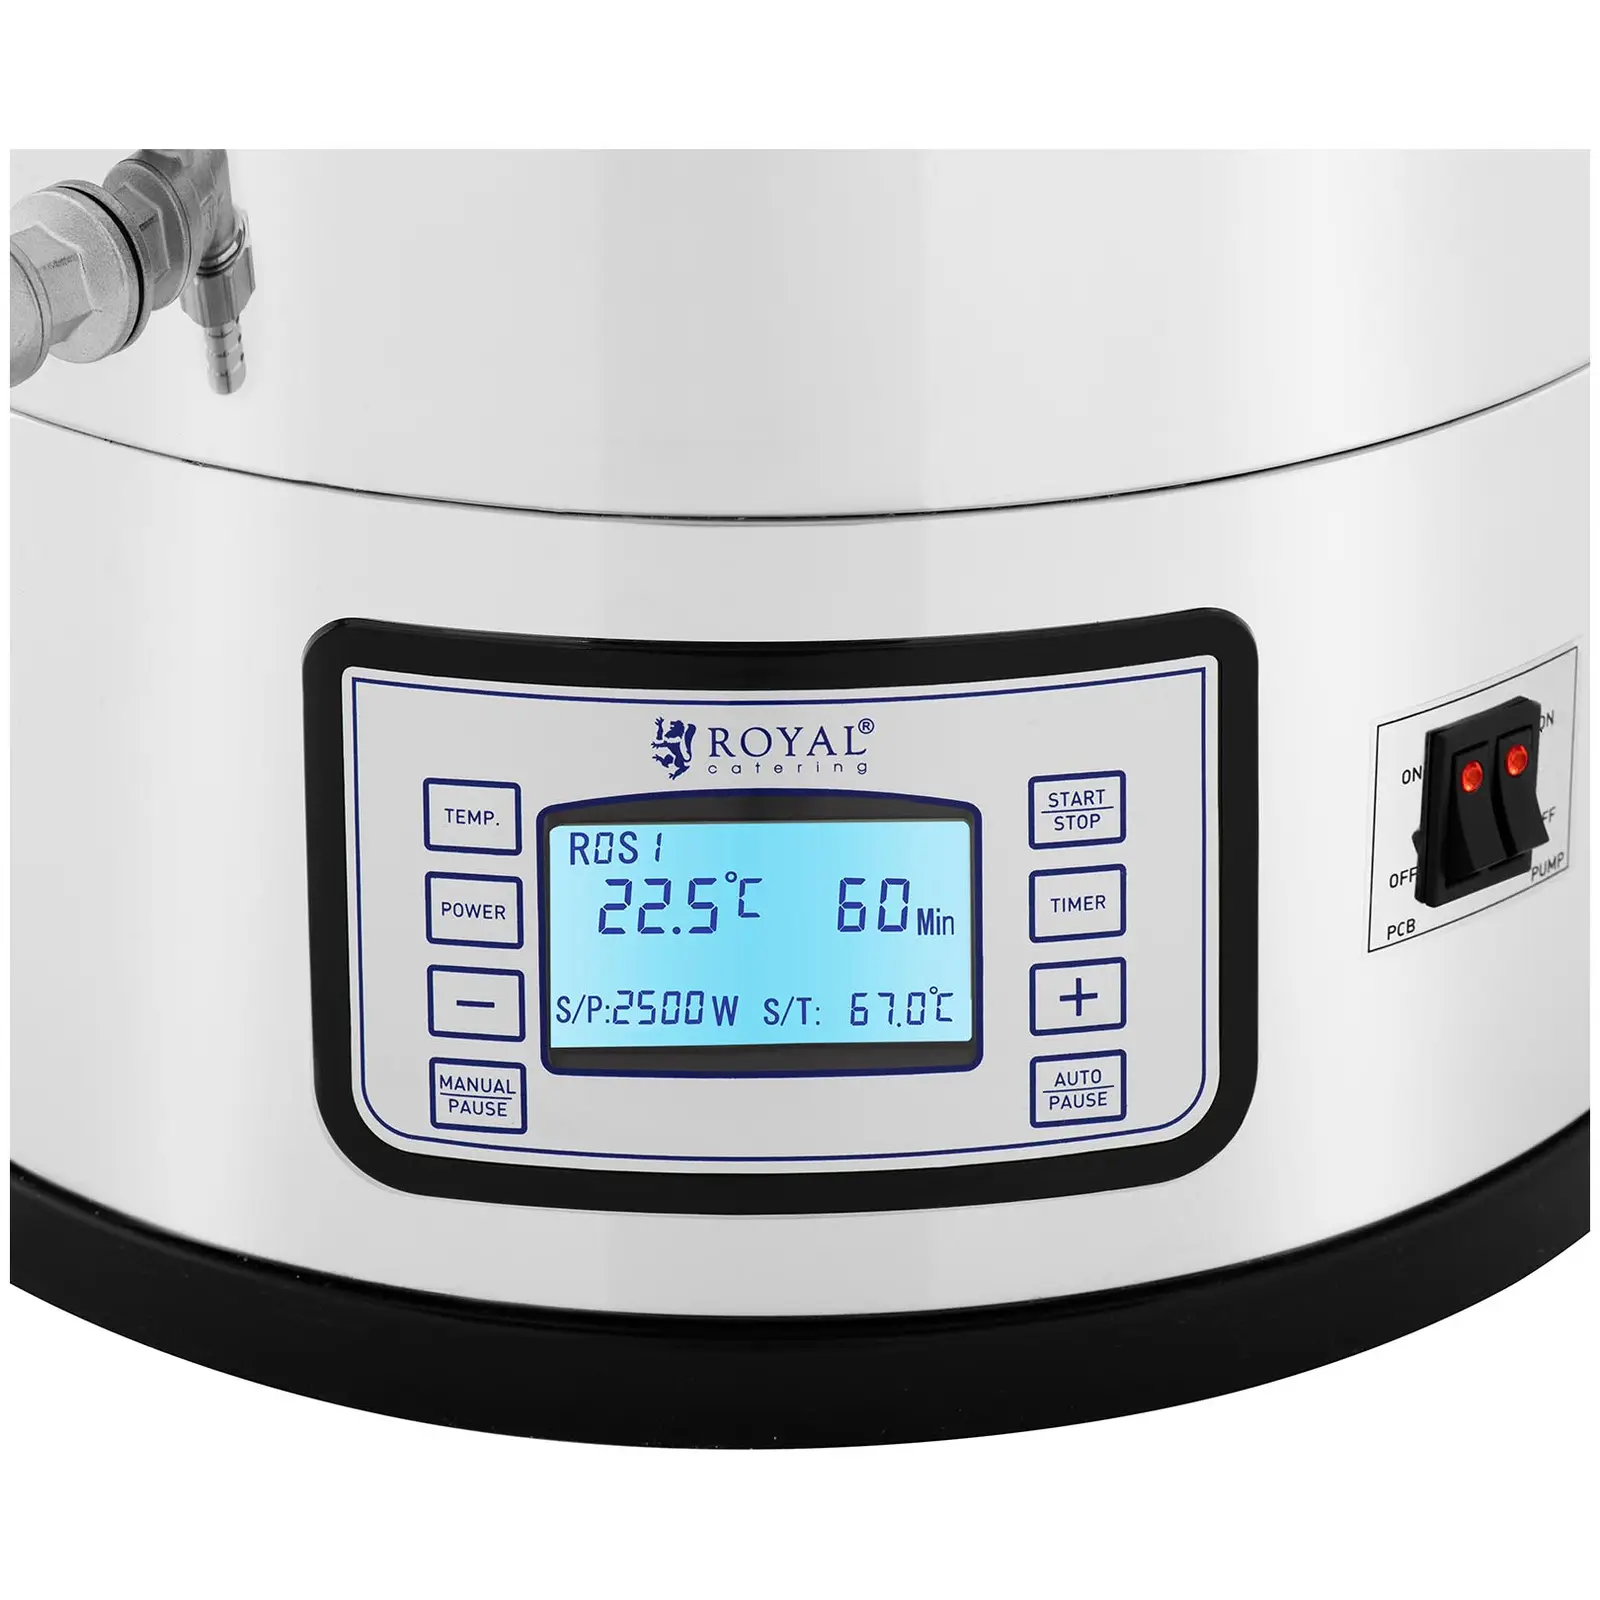 Brew Kettle -  30 L - 2,500 W -  ° C - Stainless steel - Display  - Timer